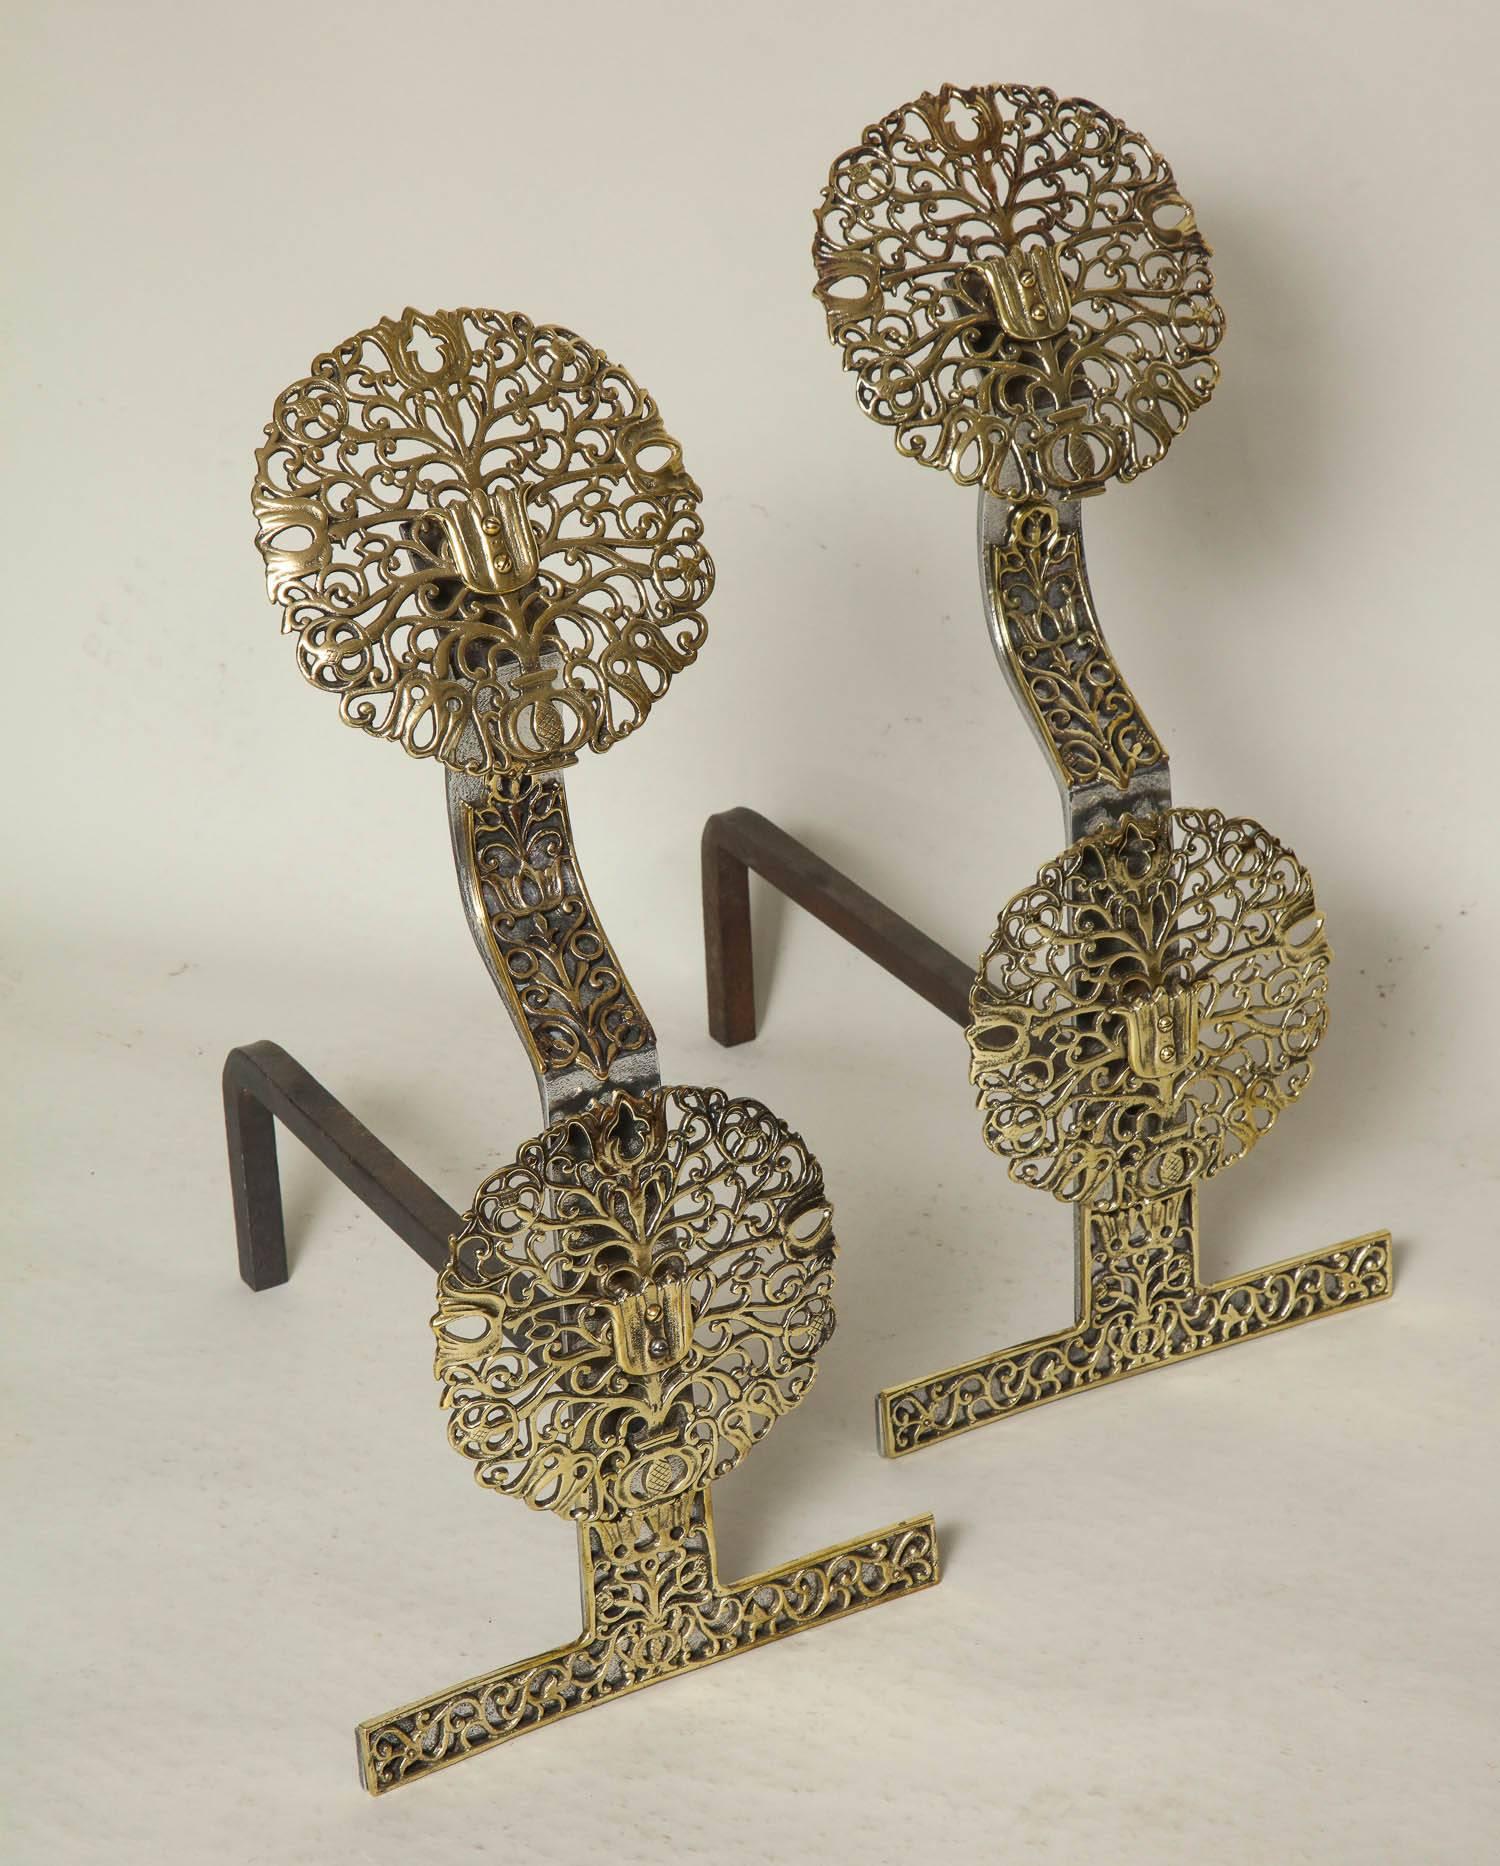 Fine pair of English Arts & Crafts andirons having pierced brass filigree finials and bosses and applied pierced brass mounts reminiscent of the tree of life.